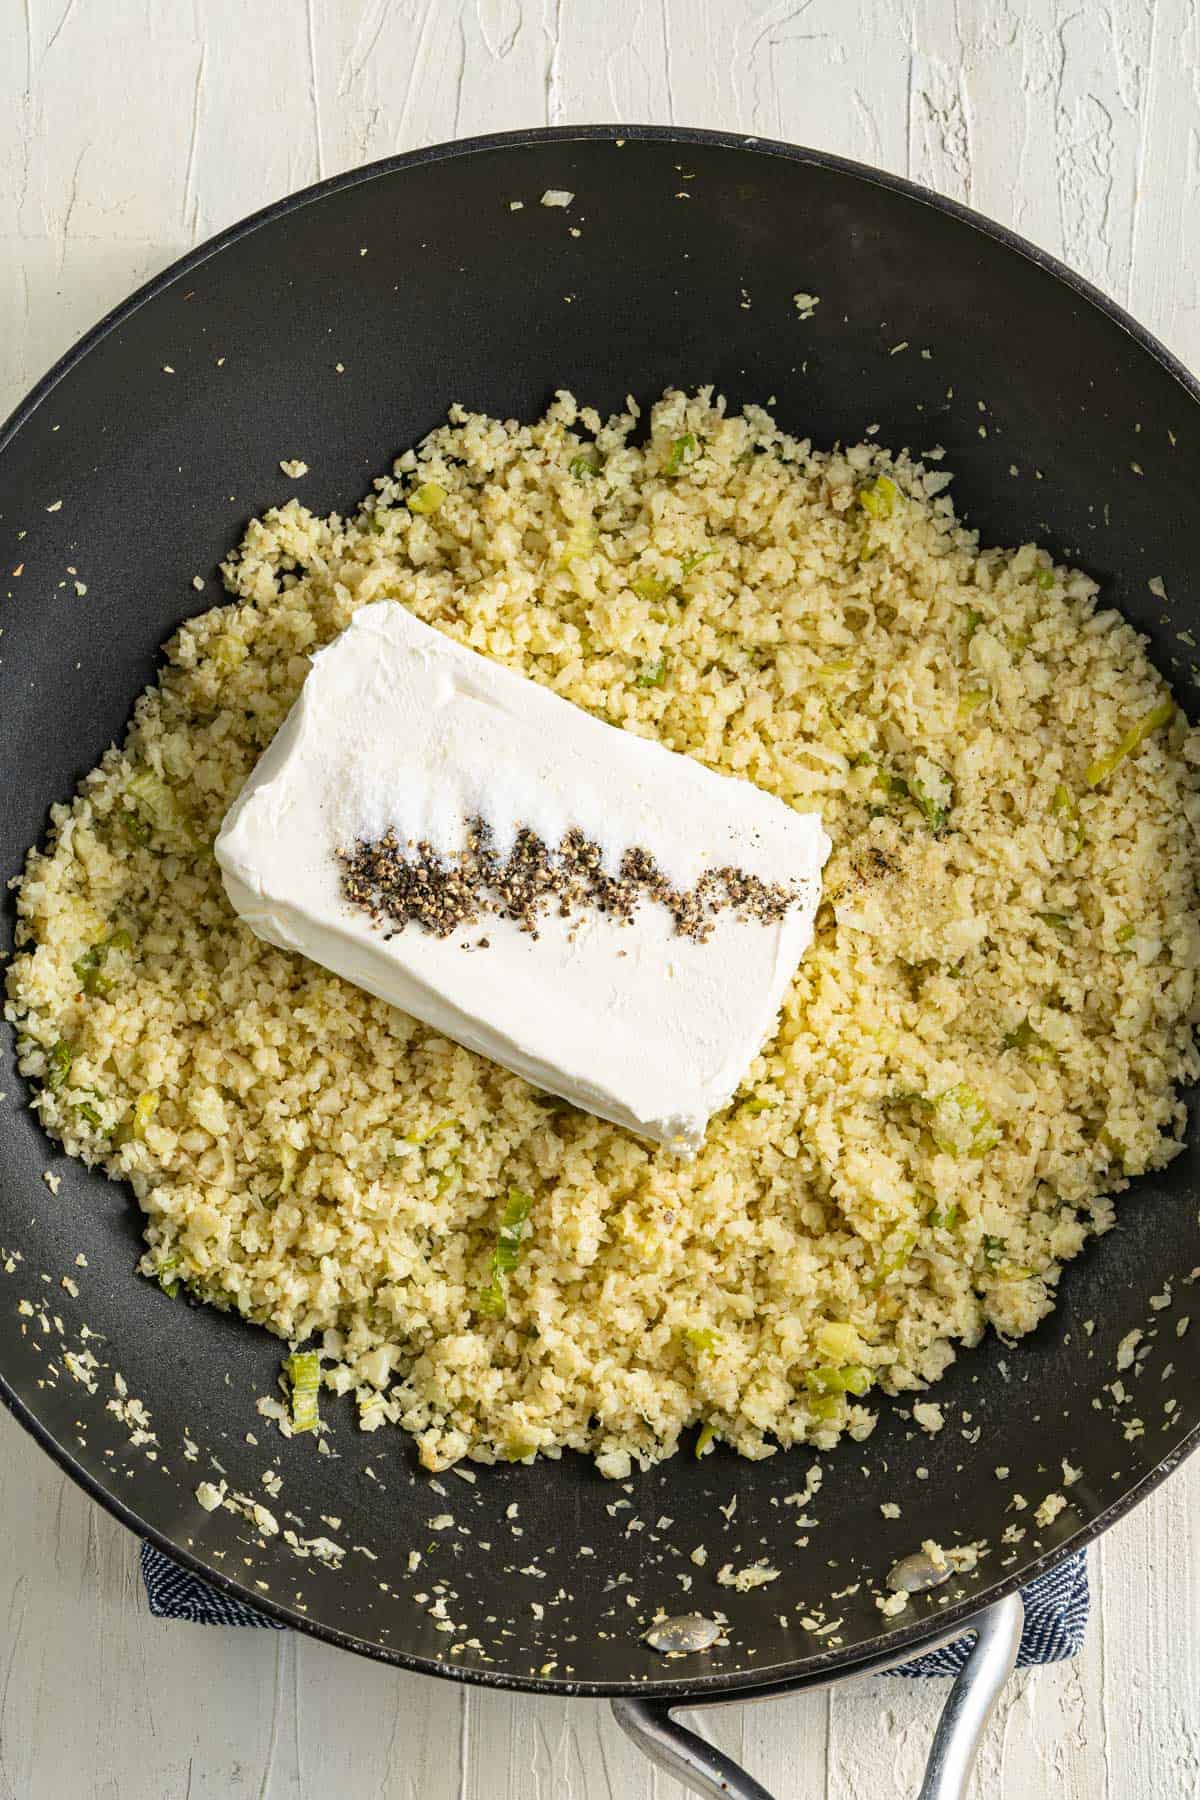 A large black skillet contains sautéed cauliflower rice with a block of cream cheese and a line of ground black pepper in the center.